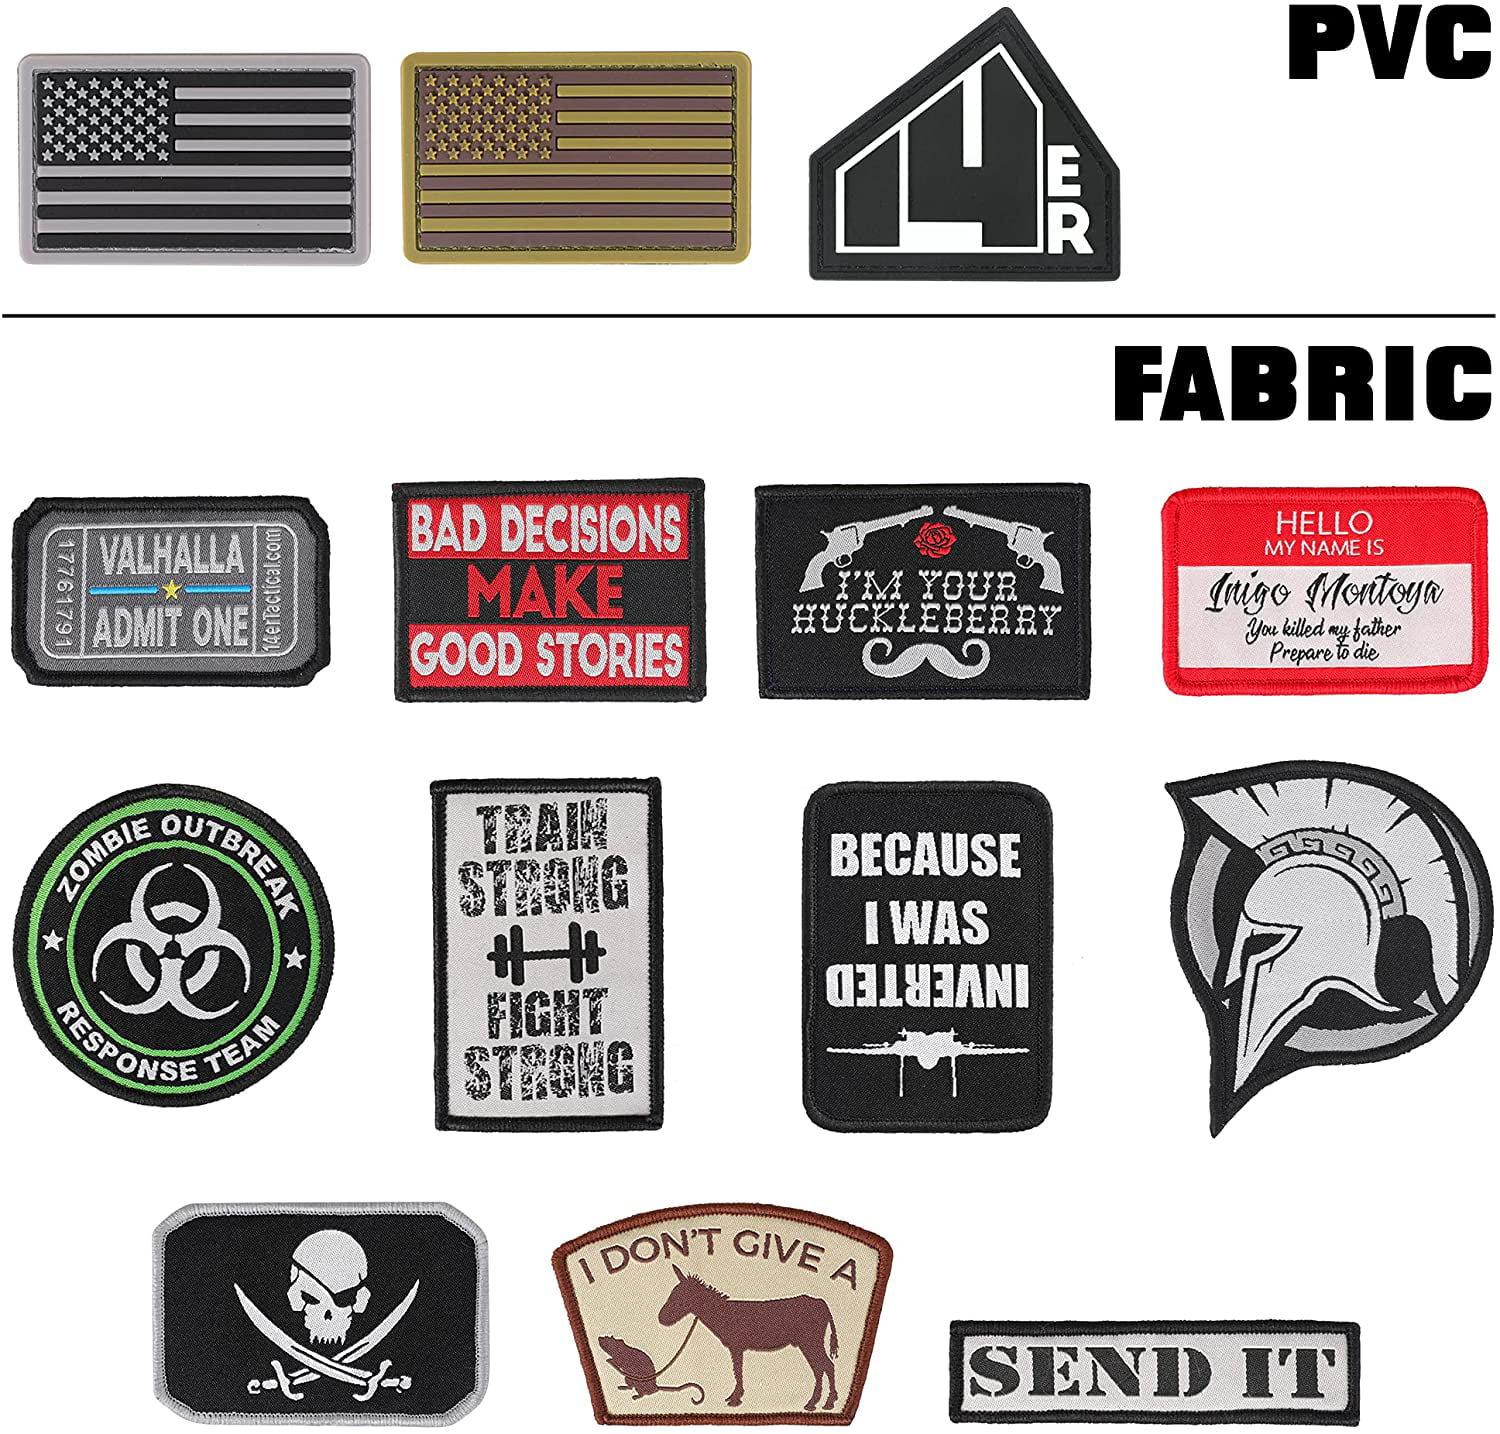 Dearhouse 14er Tactical Morale Patches (14-Pack), Hook & Loop Backed, 3 x  2 PVC Flags & Funny Patches, Perfect for Hat, Backpack, Jacket, Military,  Police, Airsoft Gear